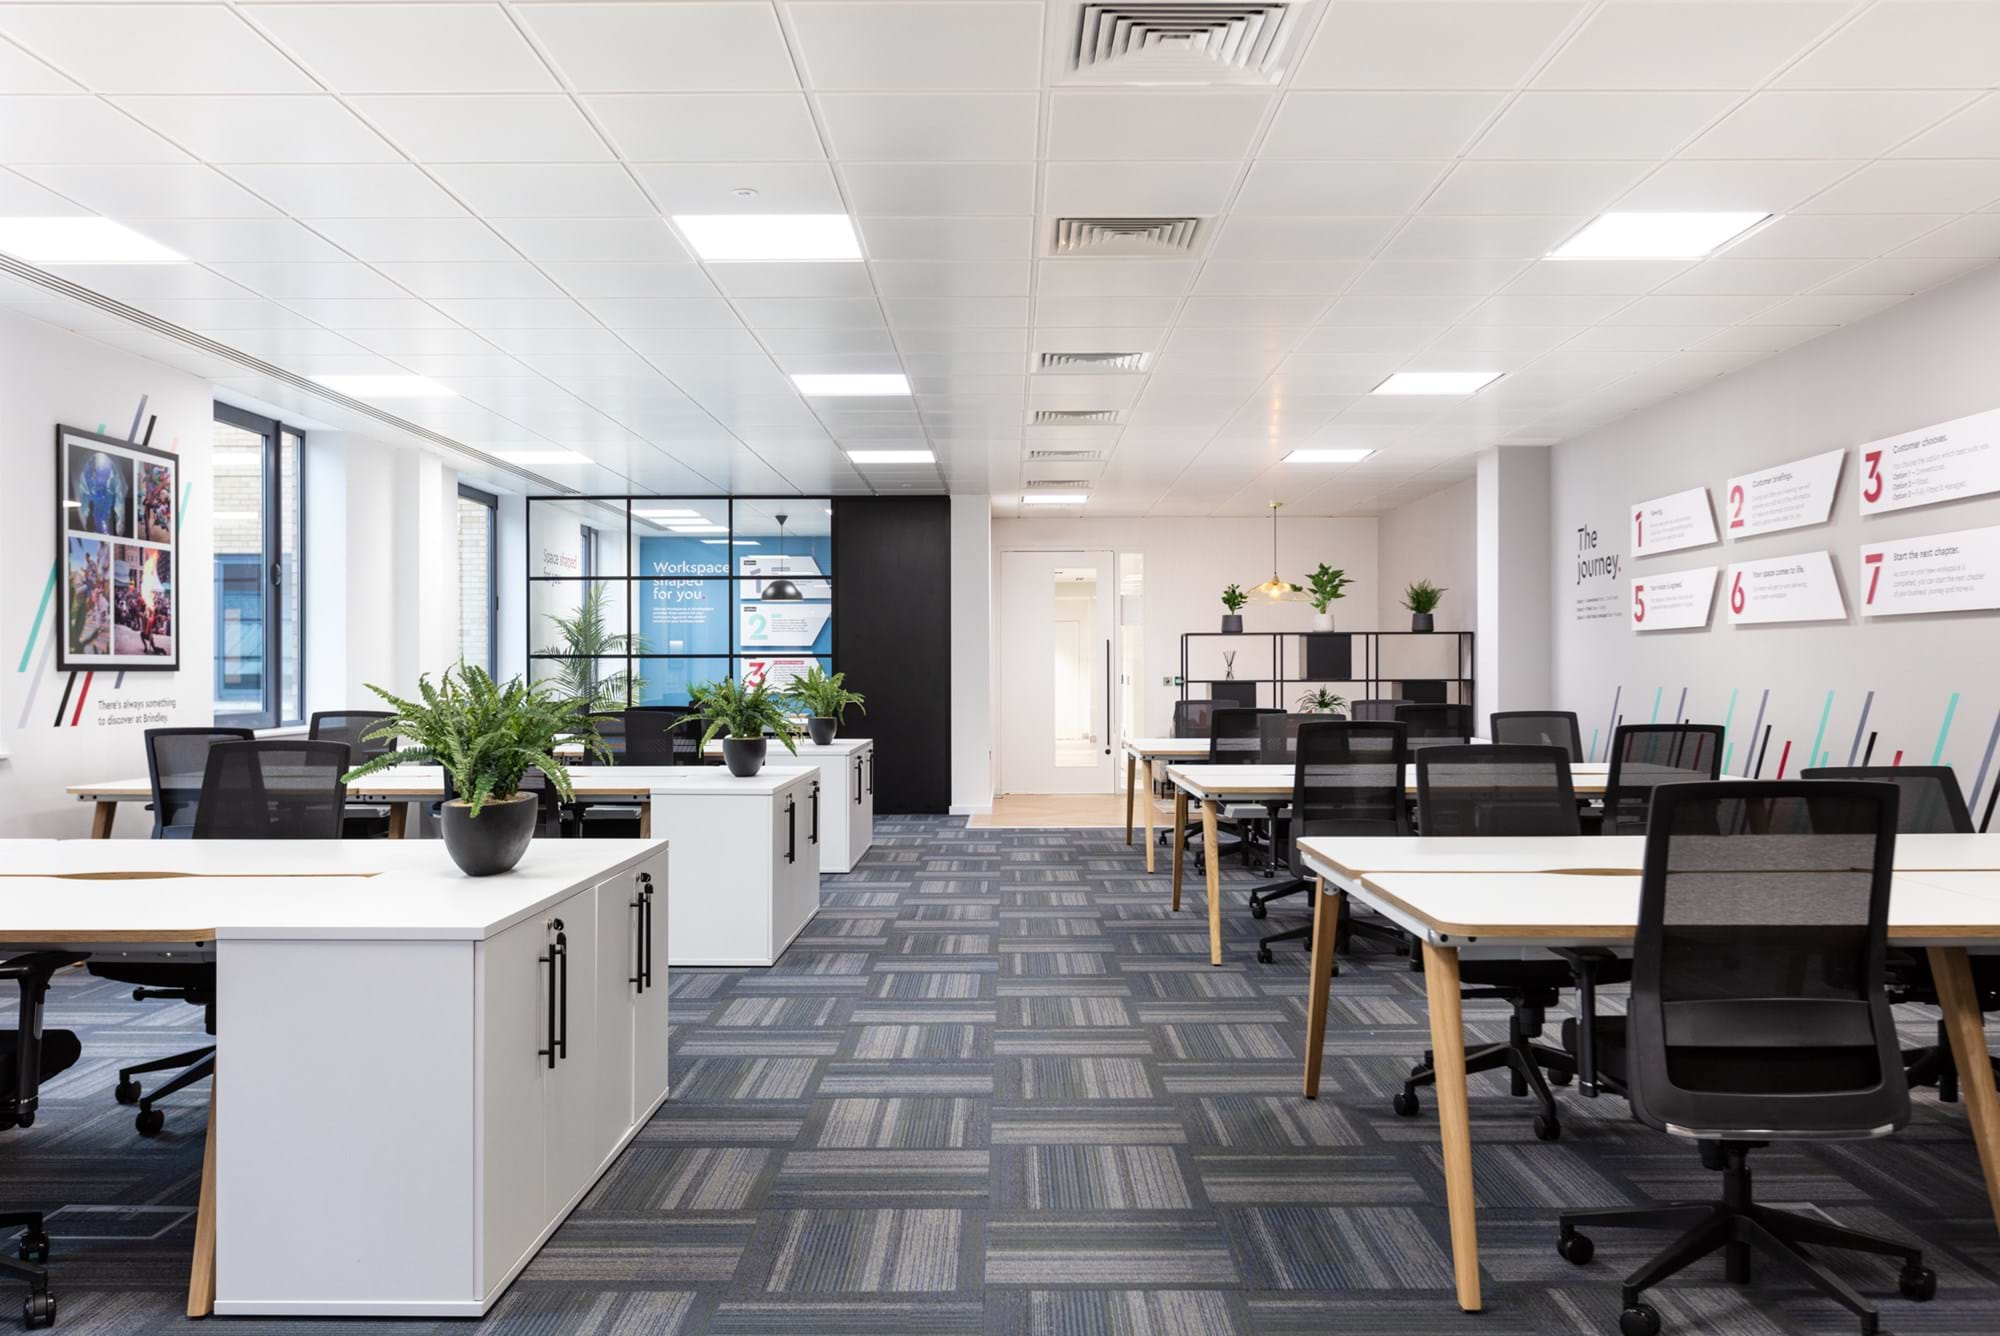 Modus Workspace office design, fit out and refurbishment - Pivot - Brindley Place - Pivot_9_BrindleyPlace-13.jpg